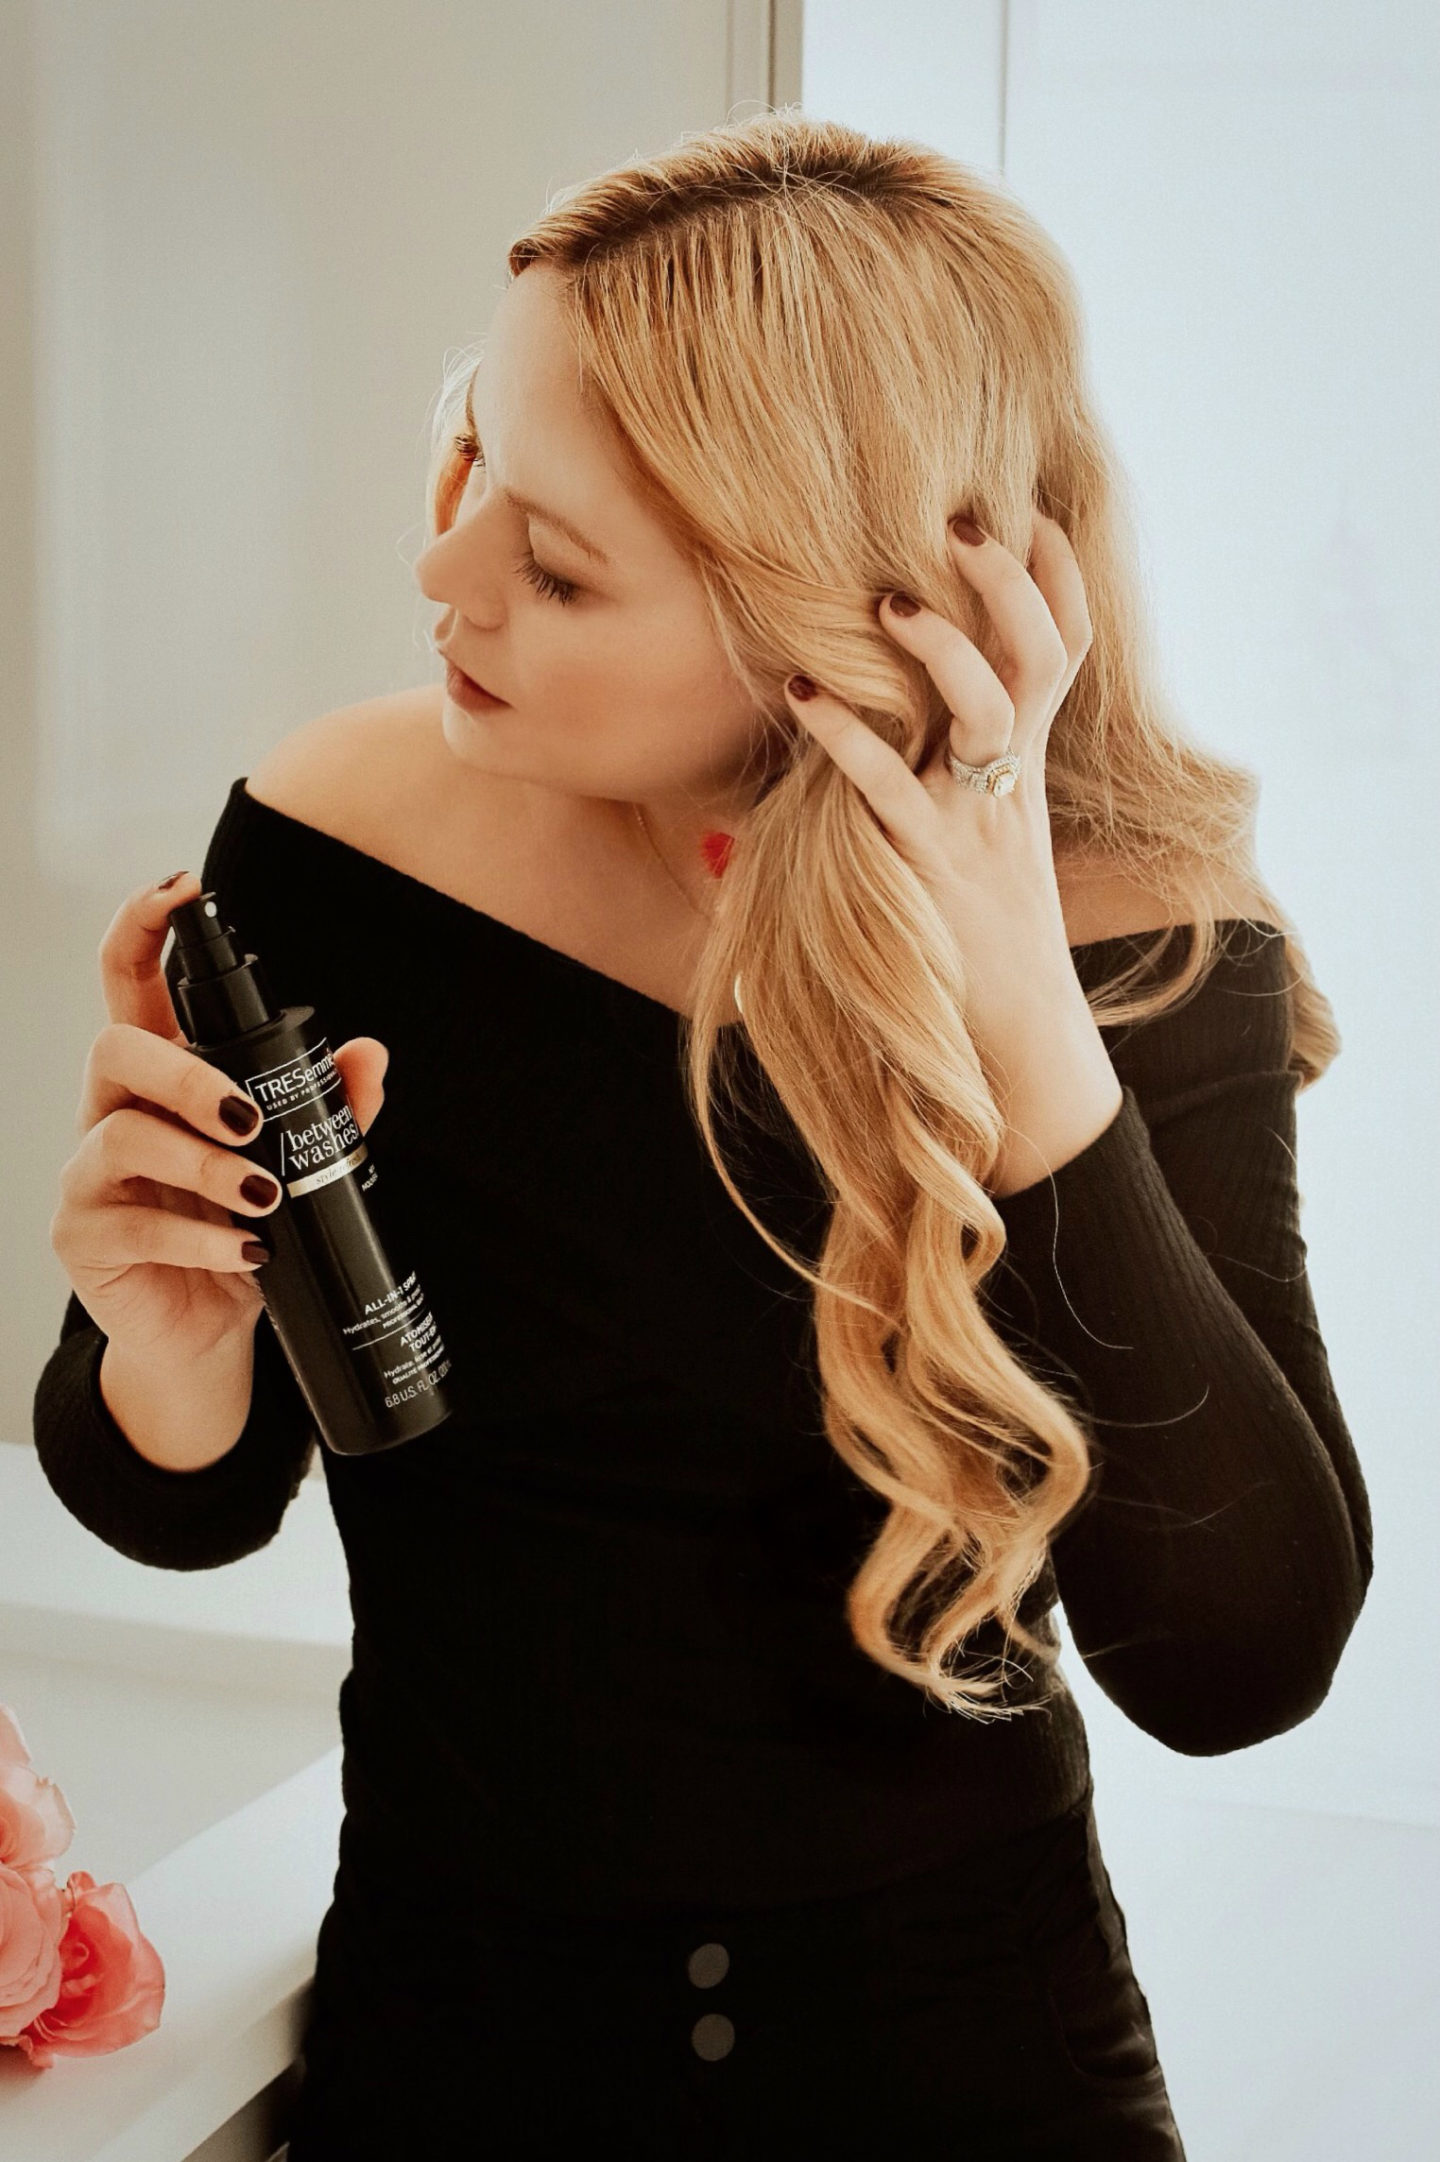 Tresemme-2nd-day-hairstyle-Style-Refresy-Spray-vanessa-lambert-whatwouldvwear